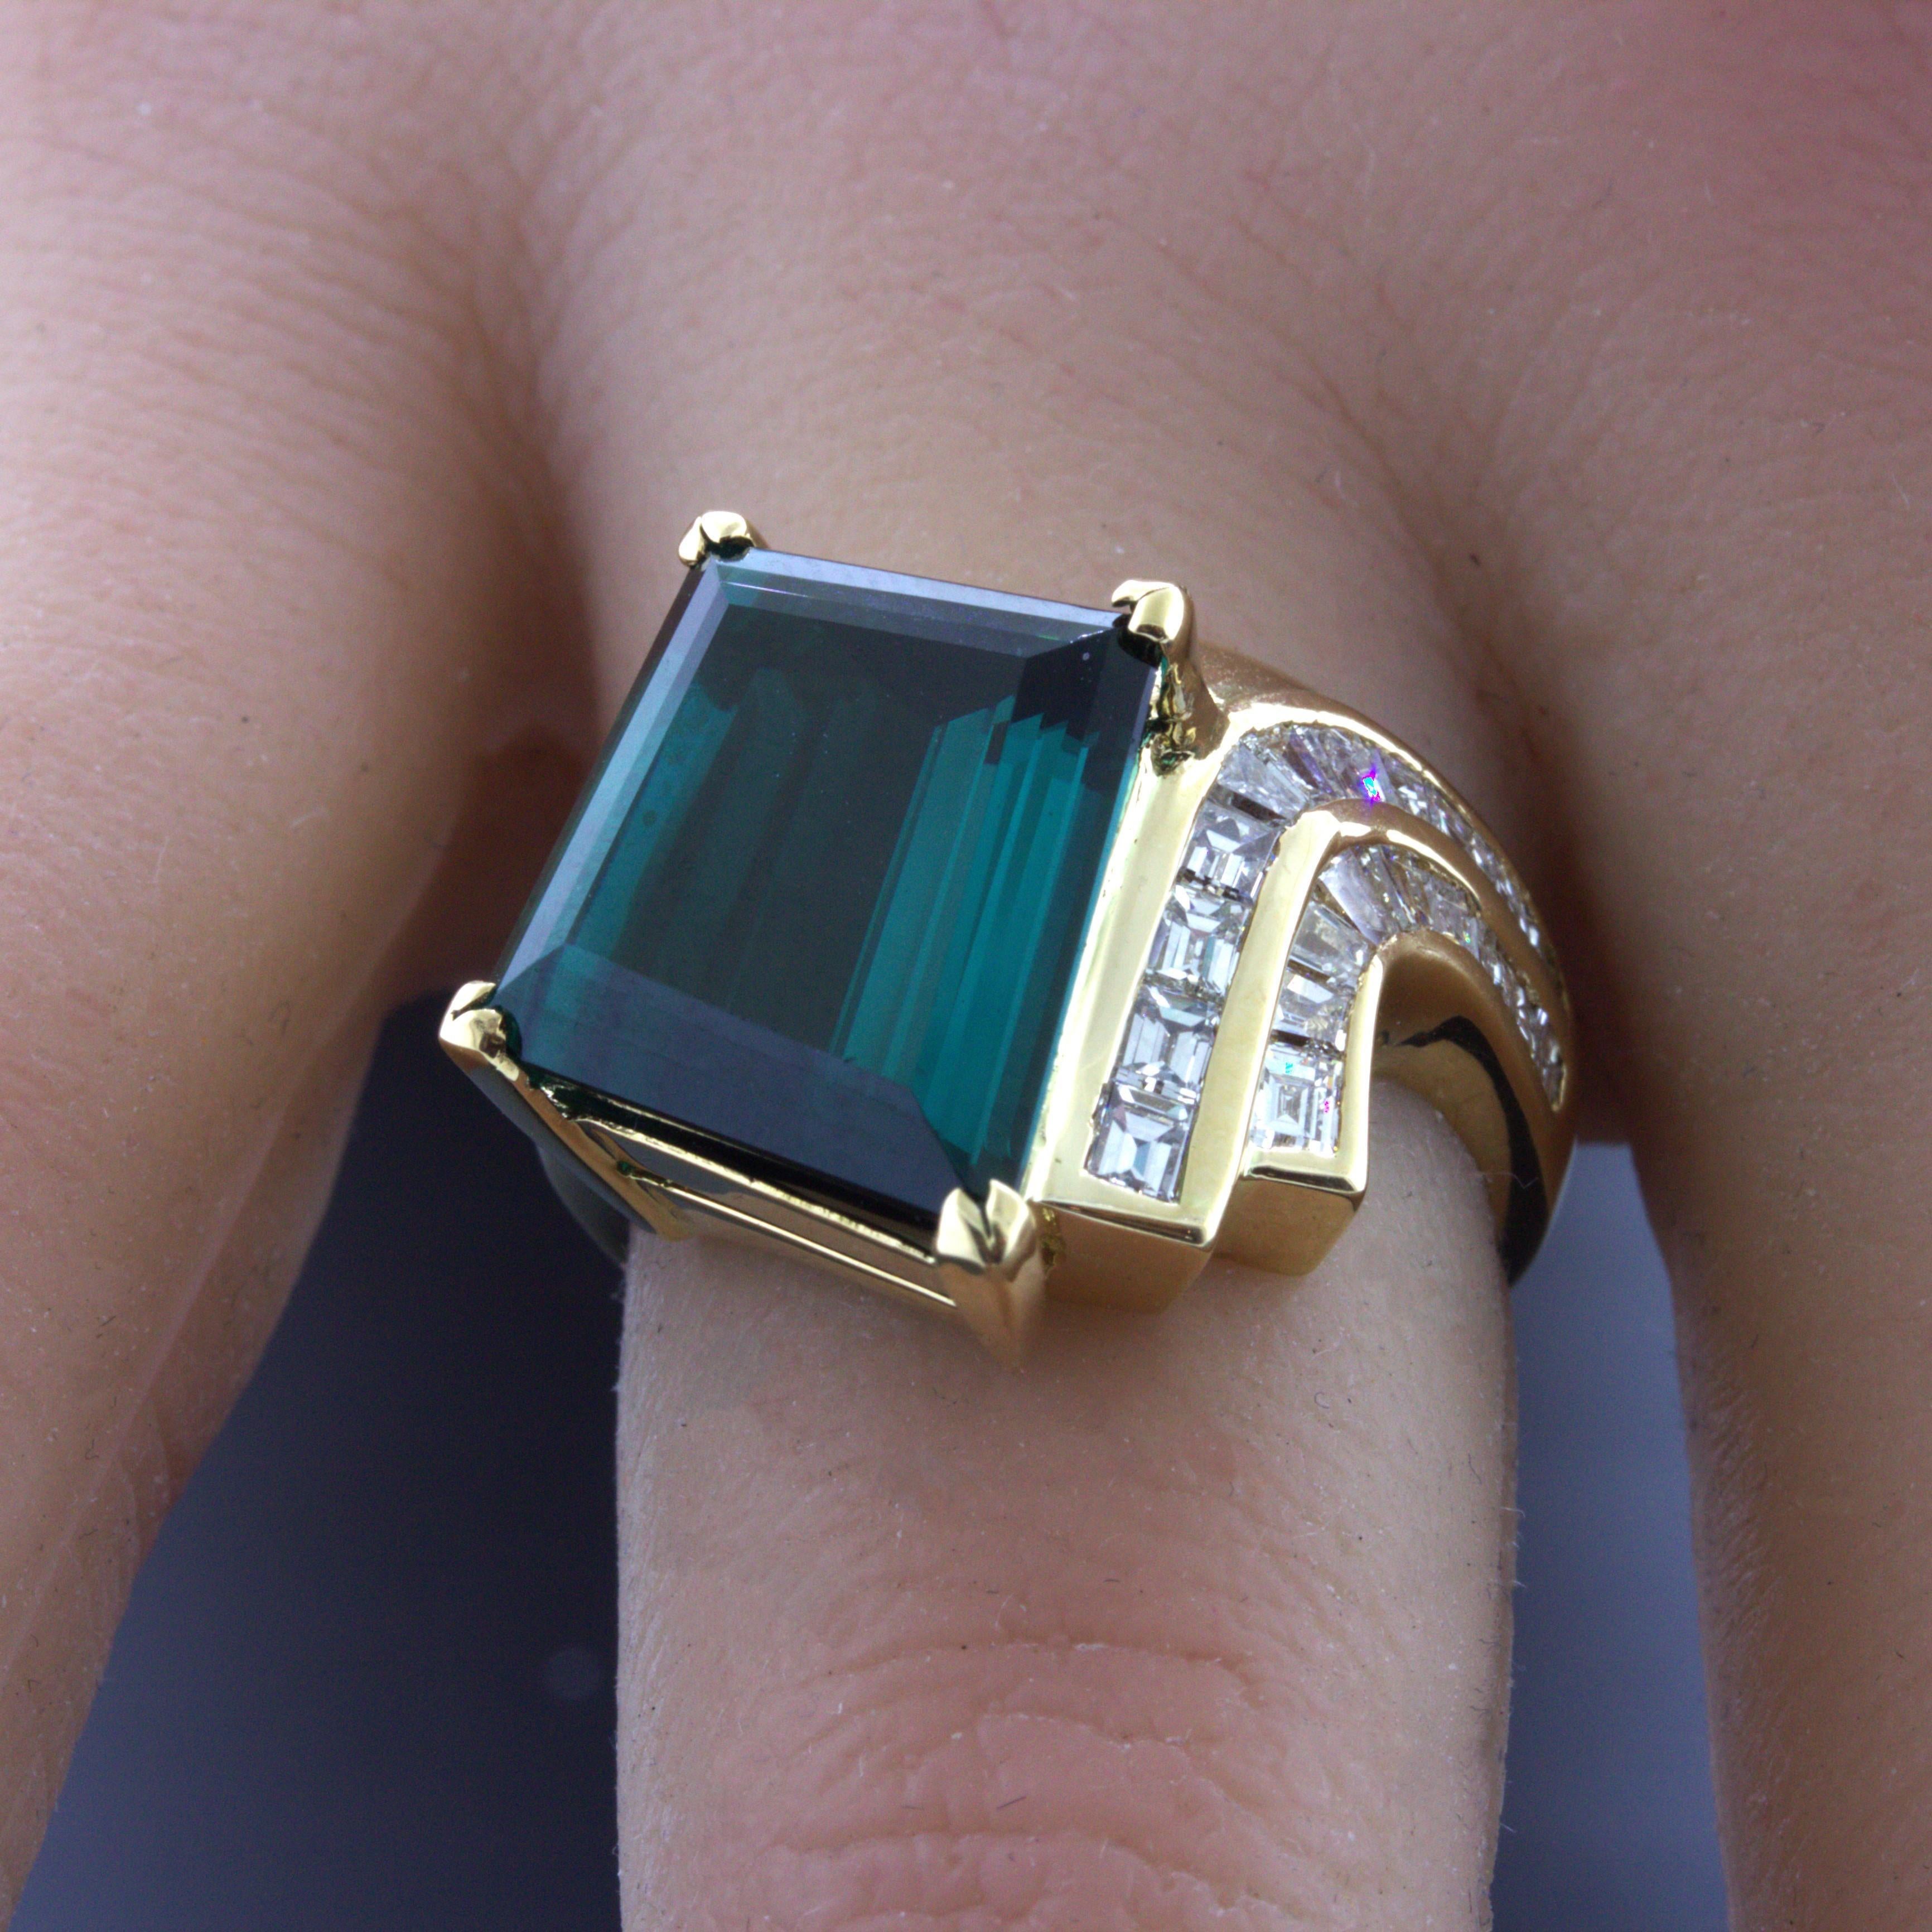 A beautiful richly colored indicolite tourmaline takes center stage! It weighs an impressive 10.62 carats and has a rich intense vivid greenish-blue color that is just so beautiful! No other gemstone can produce a color such as indicolite tourmaline